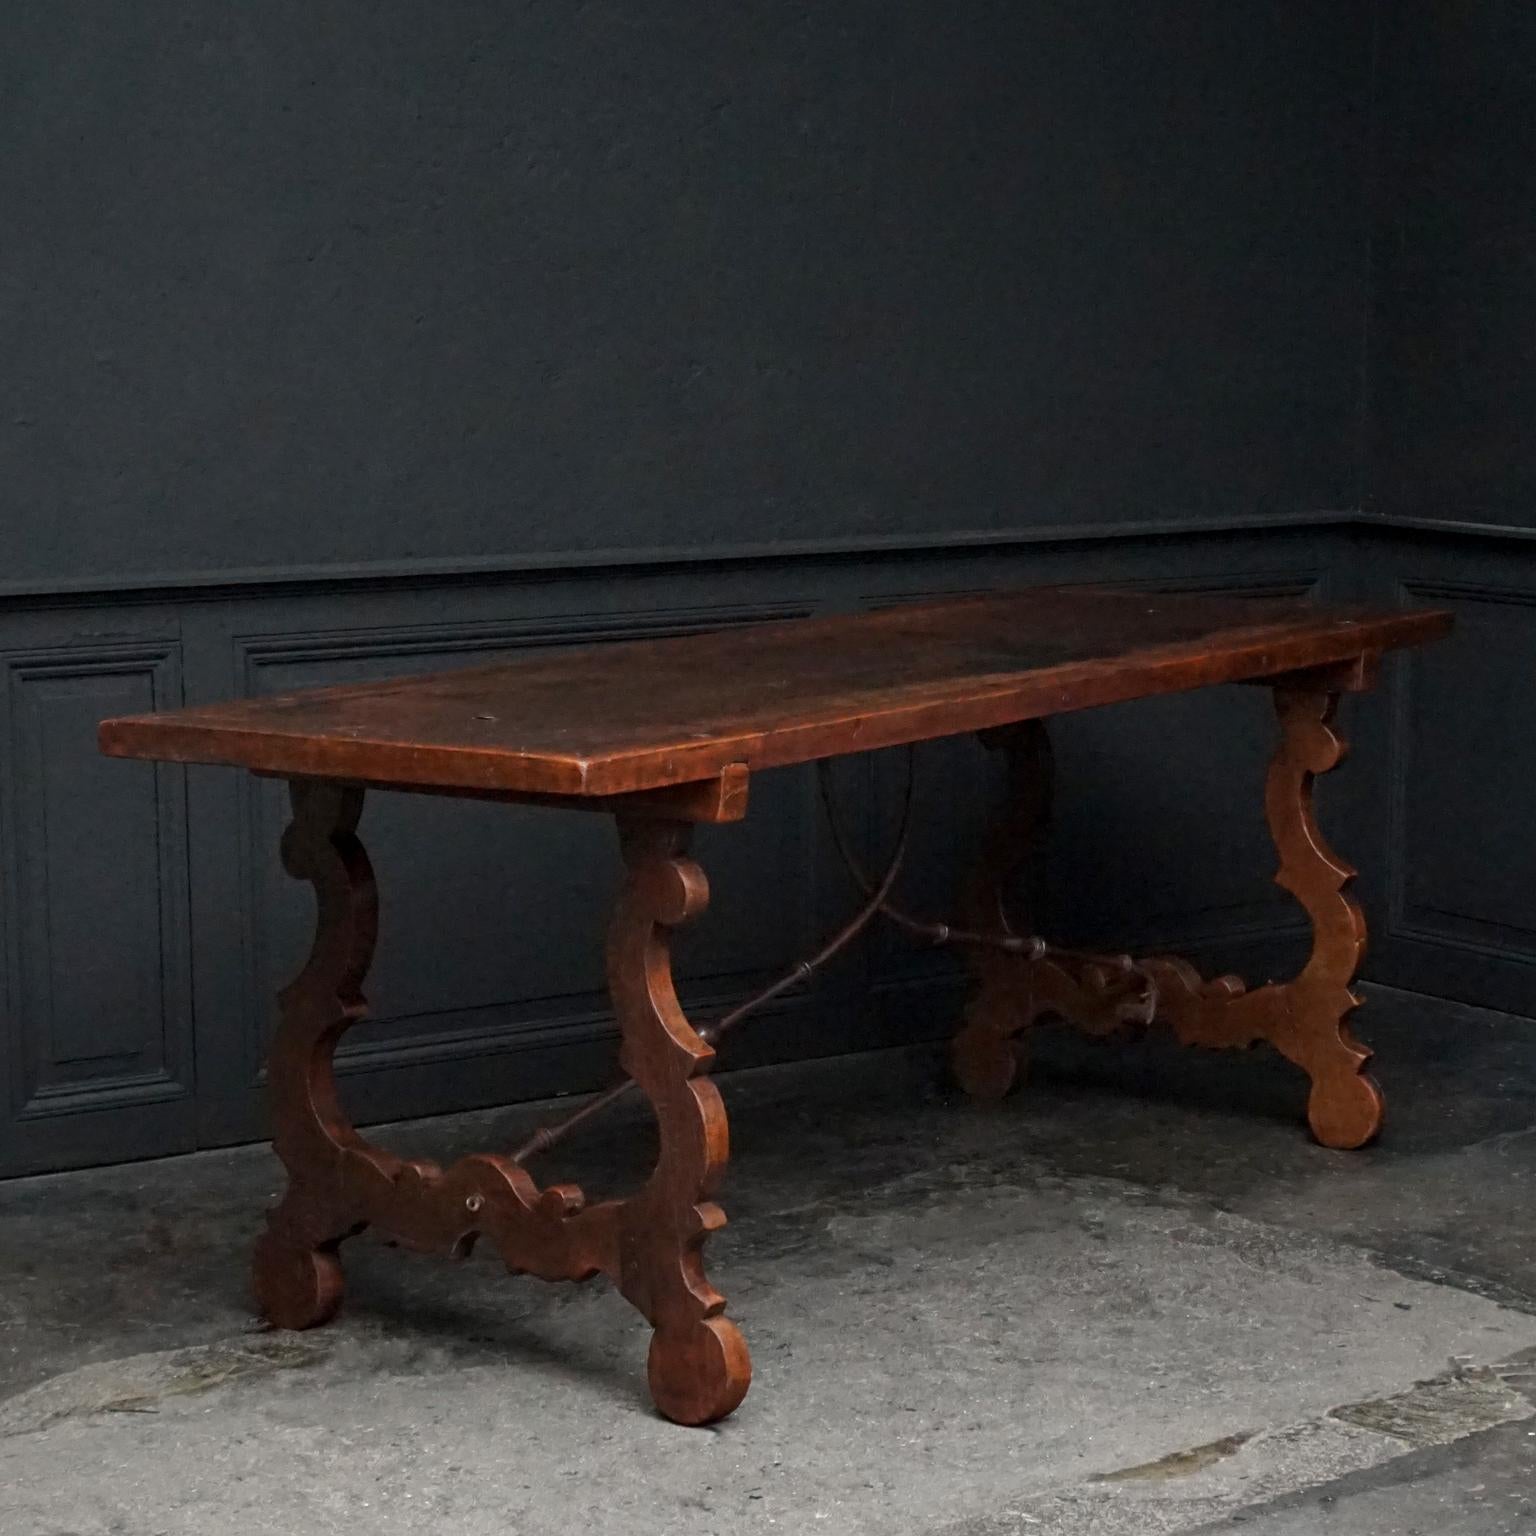 This long refectory table with original wrought iron curled stretchers would be perfect as kitchen or dinner table or as large hallway centre or side table.

The table is narrow but long and it would easily seat 4-6 comfortable spacious arm chairs